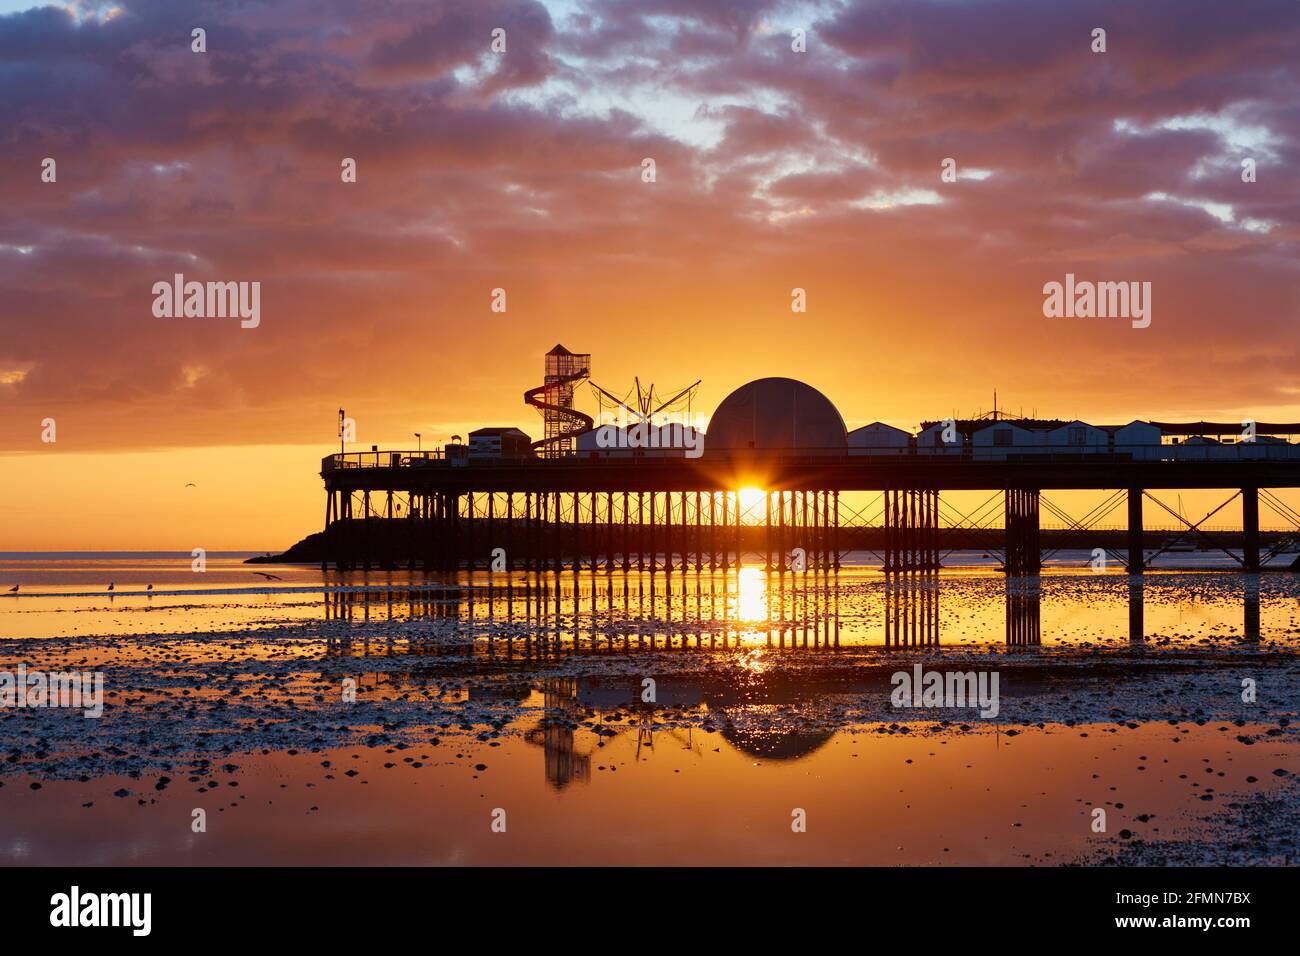 Herne Bay, Kent, UK. 11th May 2021: UK Weather. Sunrise at Herne Bay pier. With the country coming out of lockdown and the summer approaching the coastal resorts are expecting an influx of tourists as people holiday in the UK. The weather is set to be warm with a mixture of sunshine and showers for the next few days. Credit: Alan Payton/Alamy Live News Stock Photo